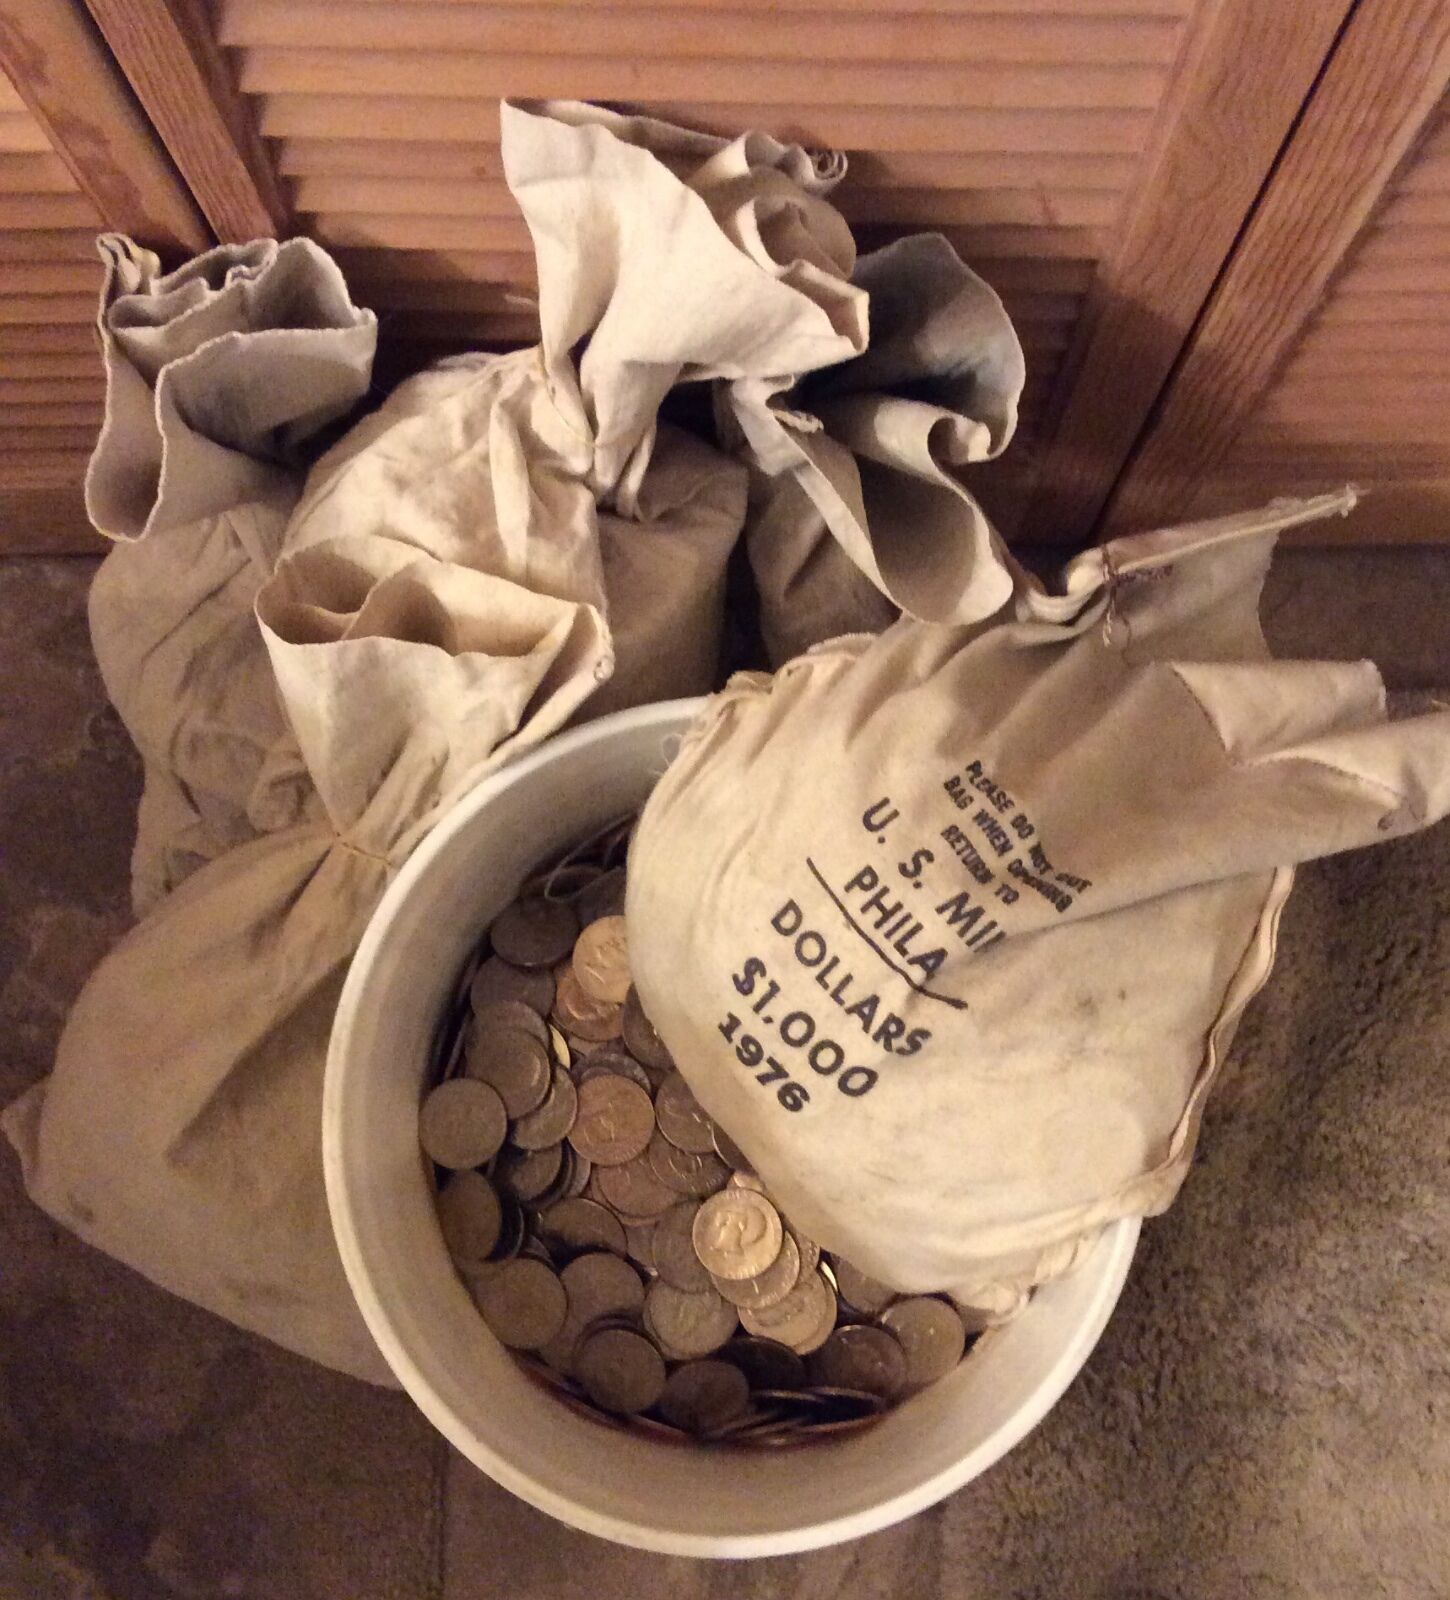 50 EISENHOWER SILVER  DOLLARS,  IKE $$  FOR YOUR SLOT MACHINE IKES MIXED DATES.